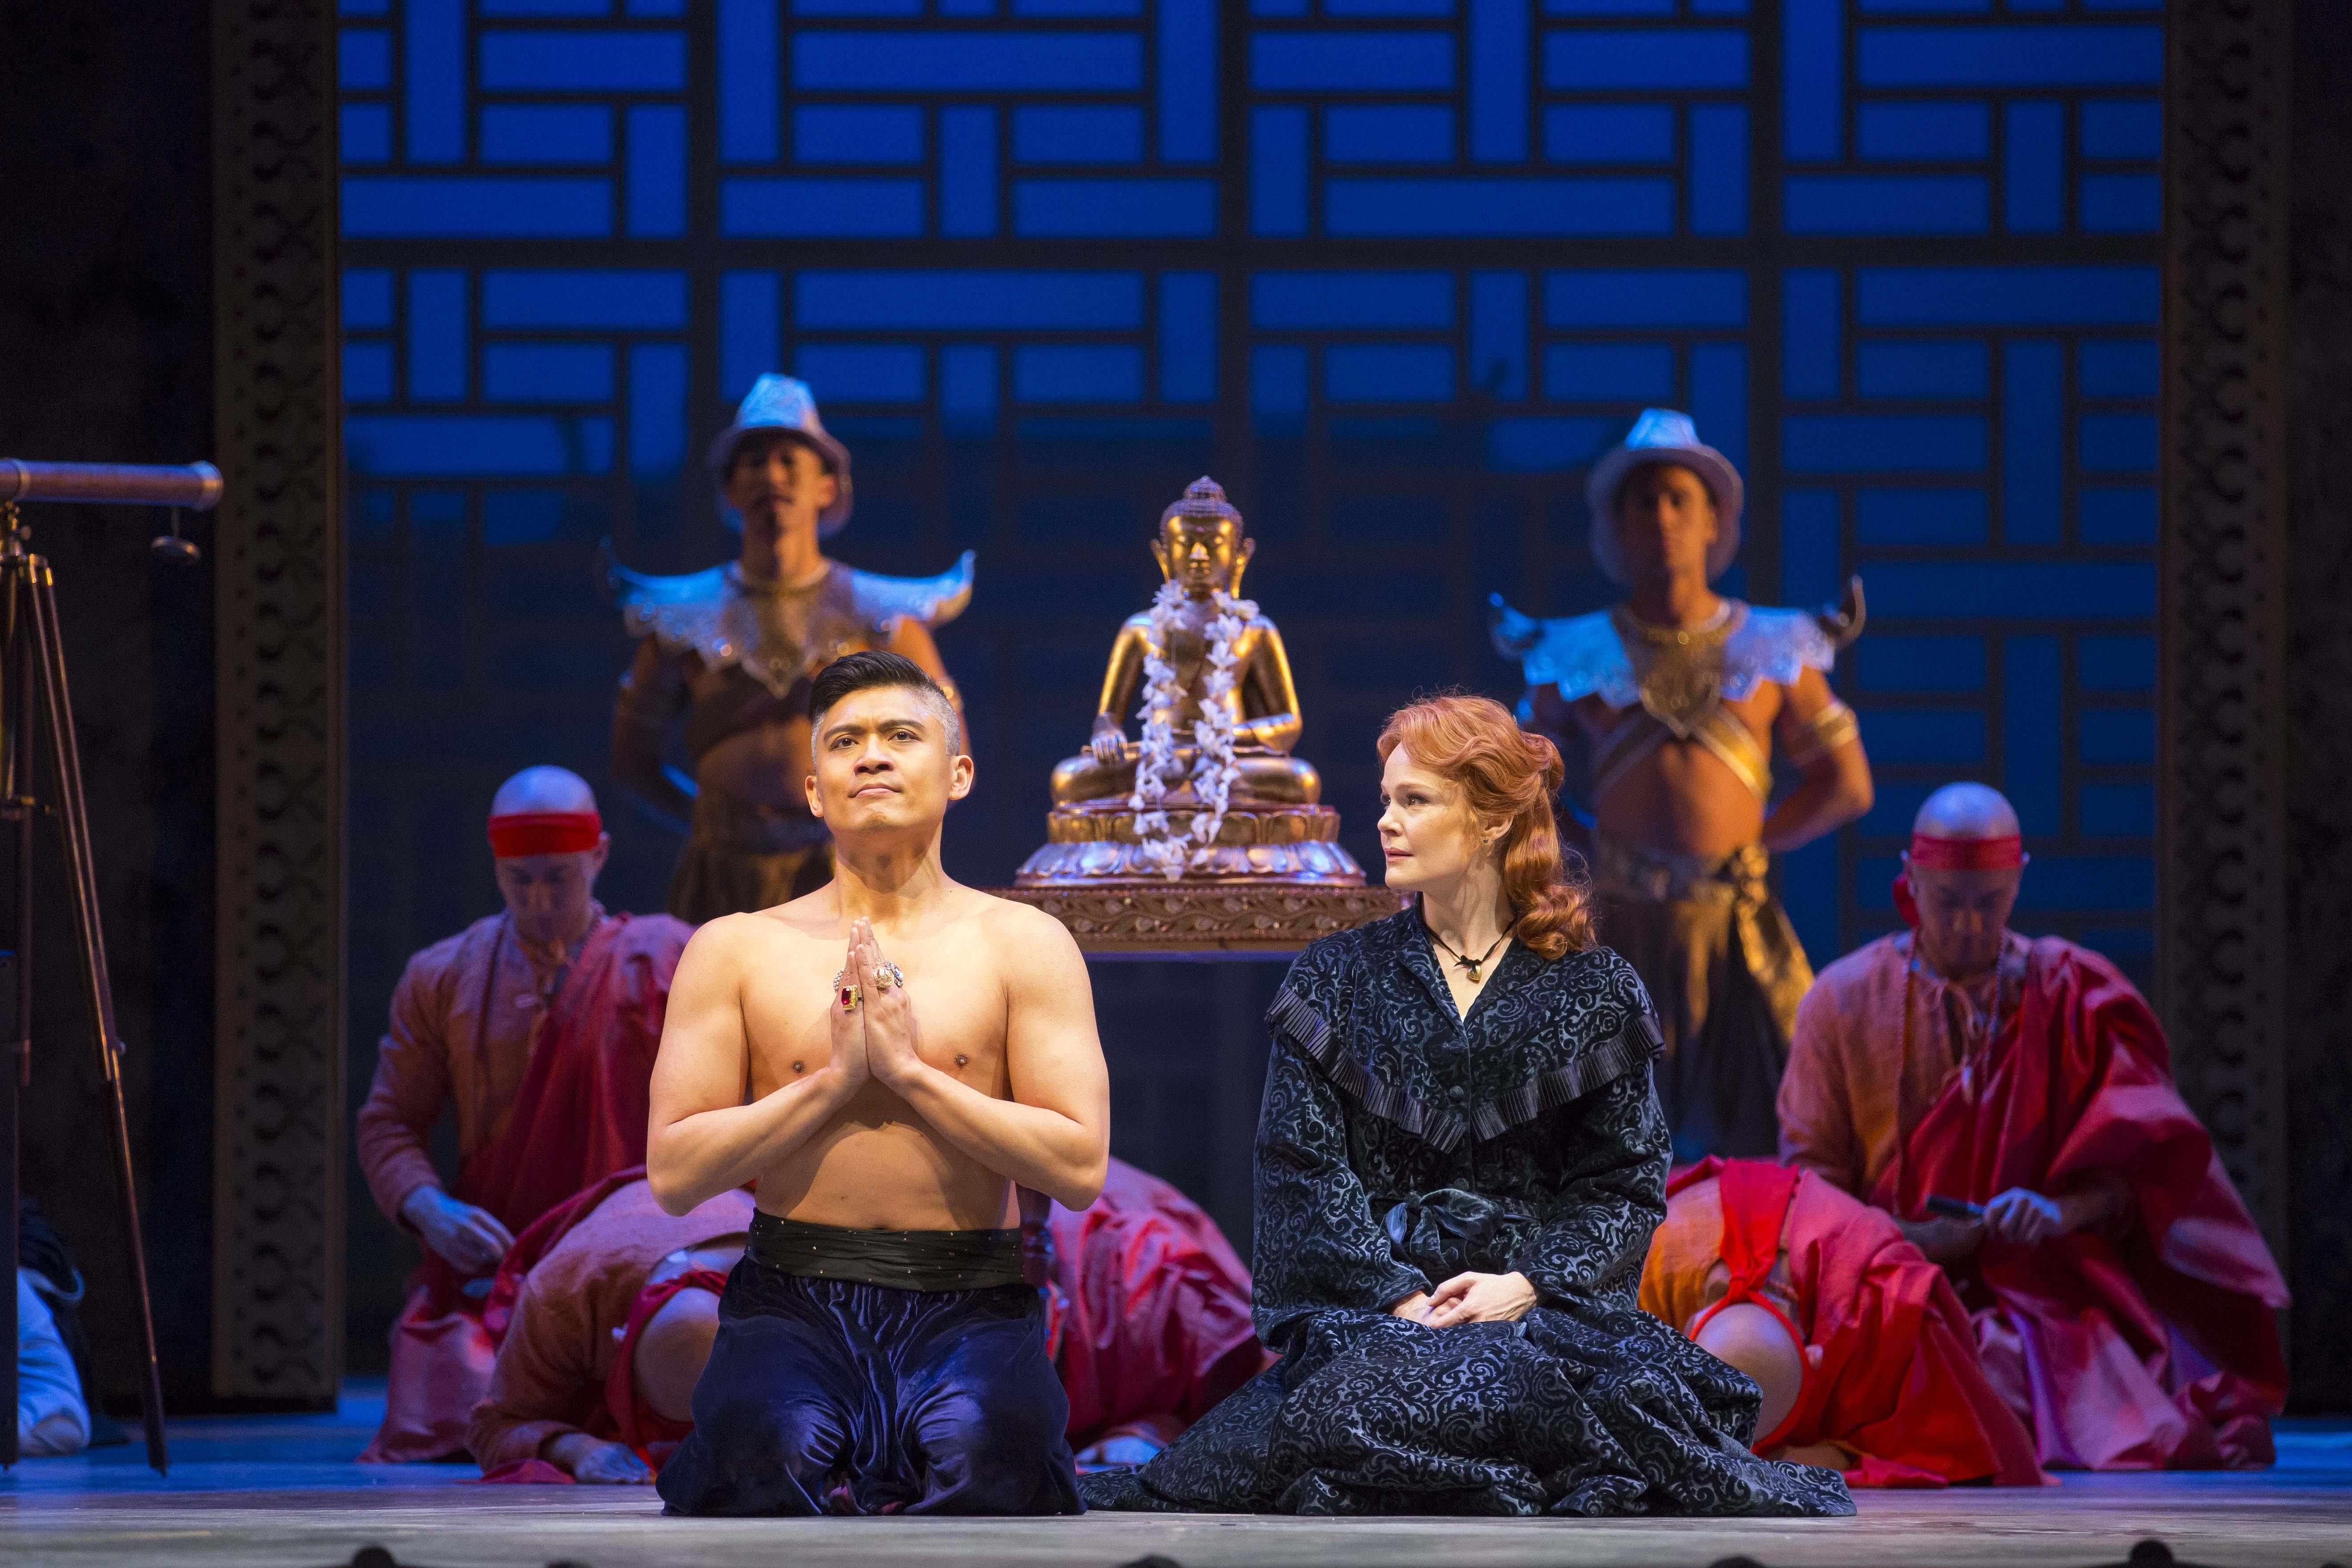 Paolo Montalban, Kate Baldwin in "The King and I" at Lyric Opera of Chicago. (Todd Rosenberg)